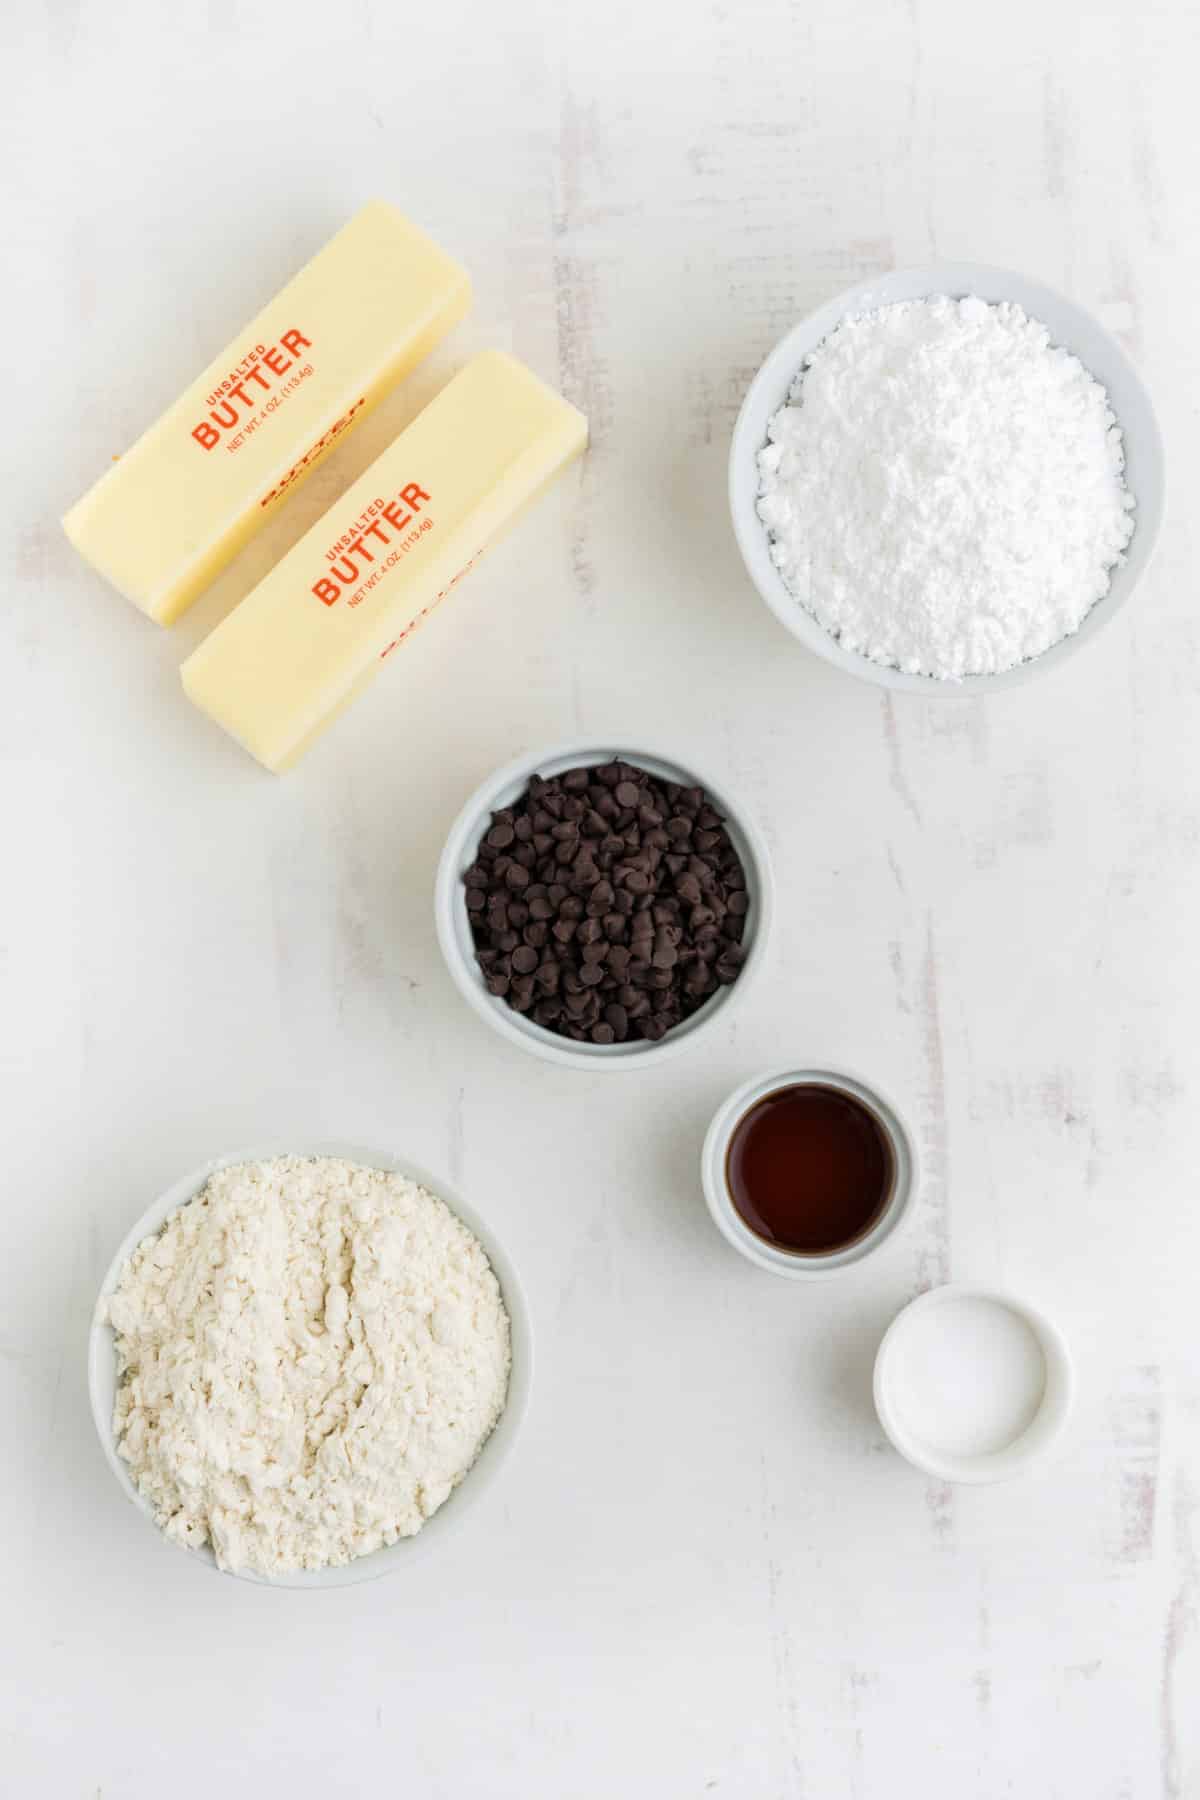 Ingredients to make snowball cookies without nuts on the table before mixing.